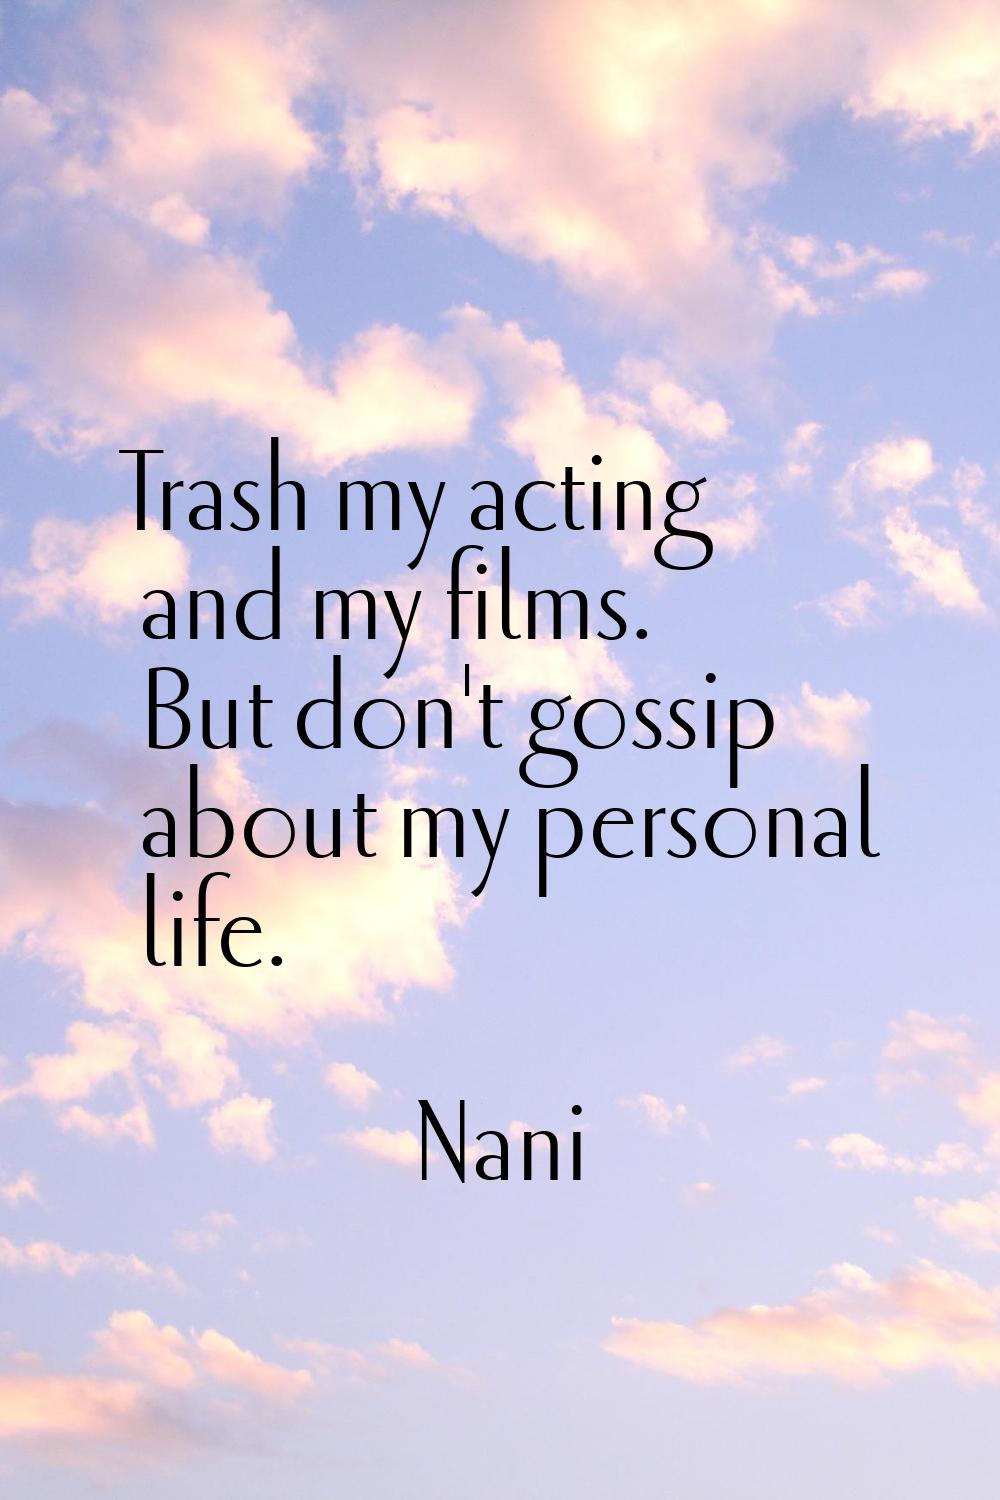 Trash my acting and my films. But don't gossip about my personal life.